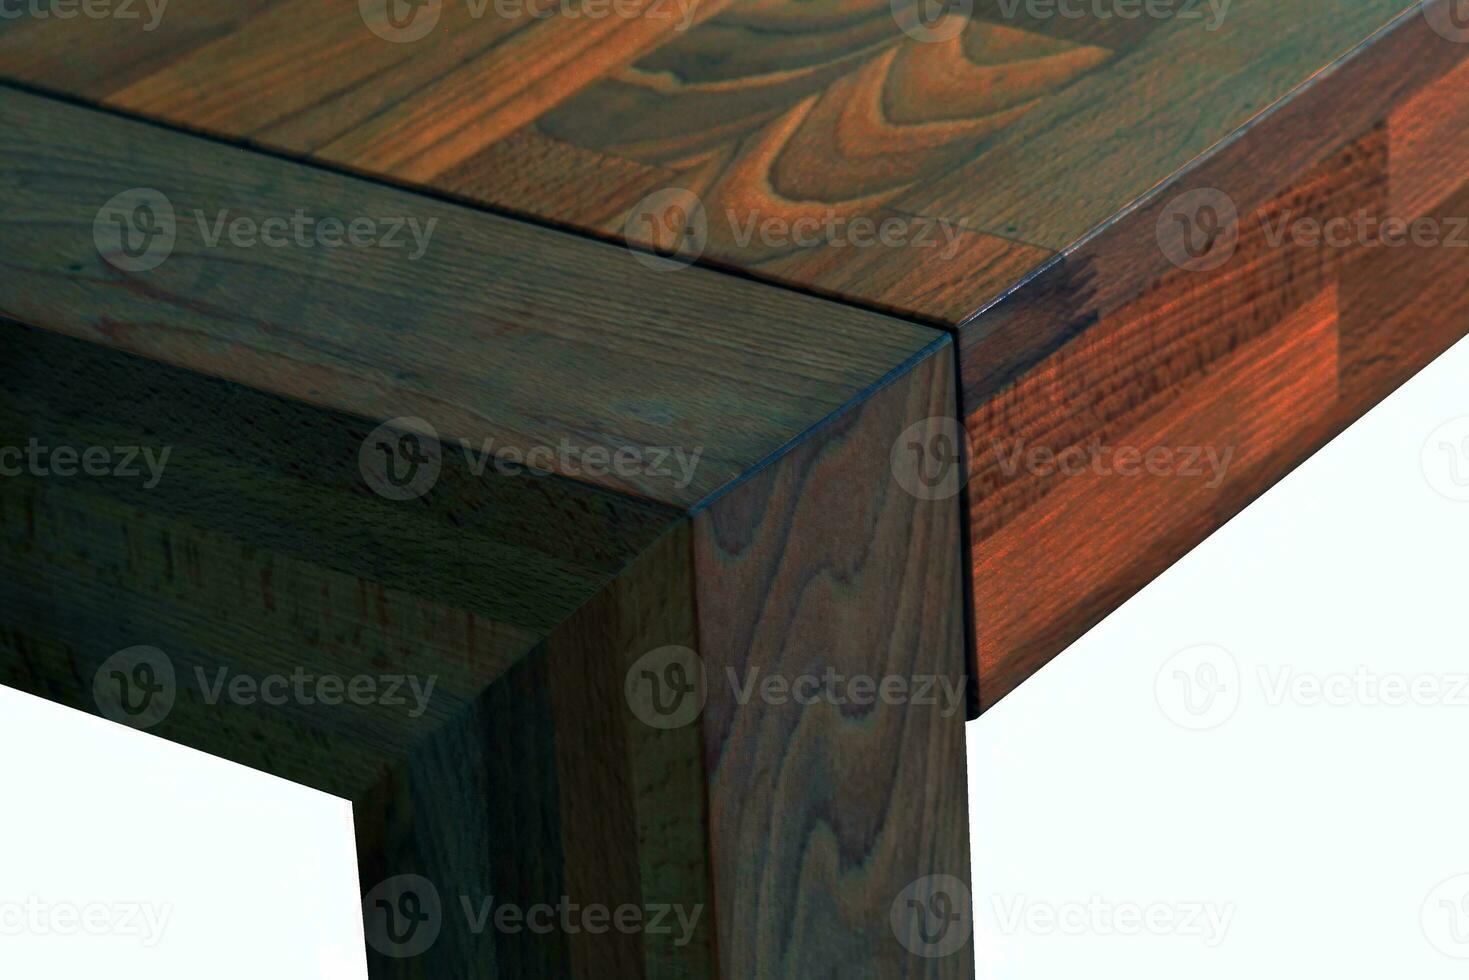 Wooden dinner table surface. Natural wood furniture close view photo